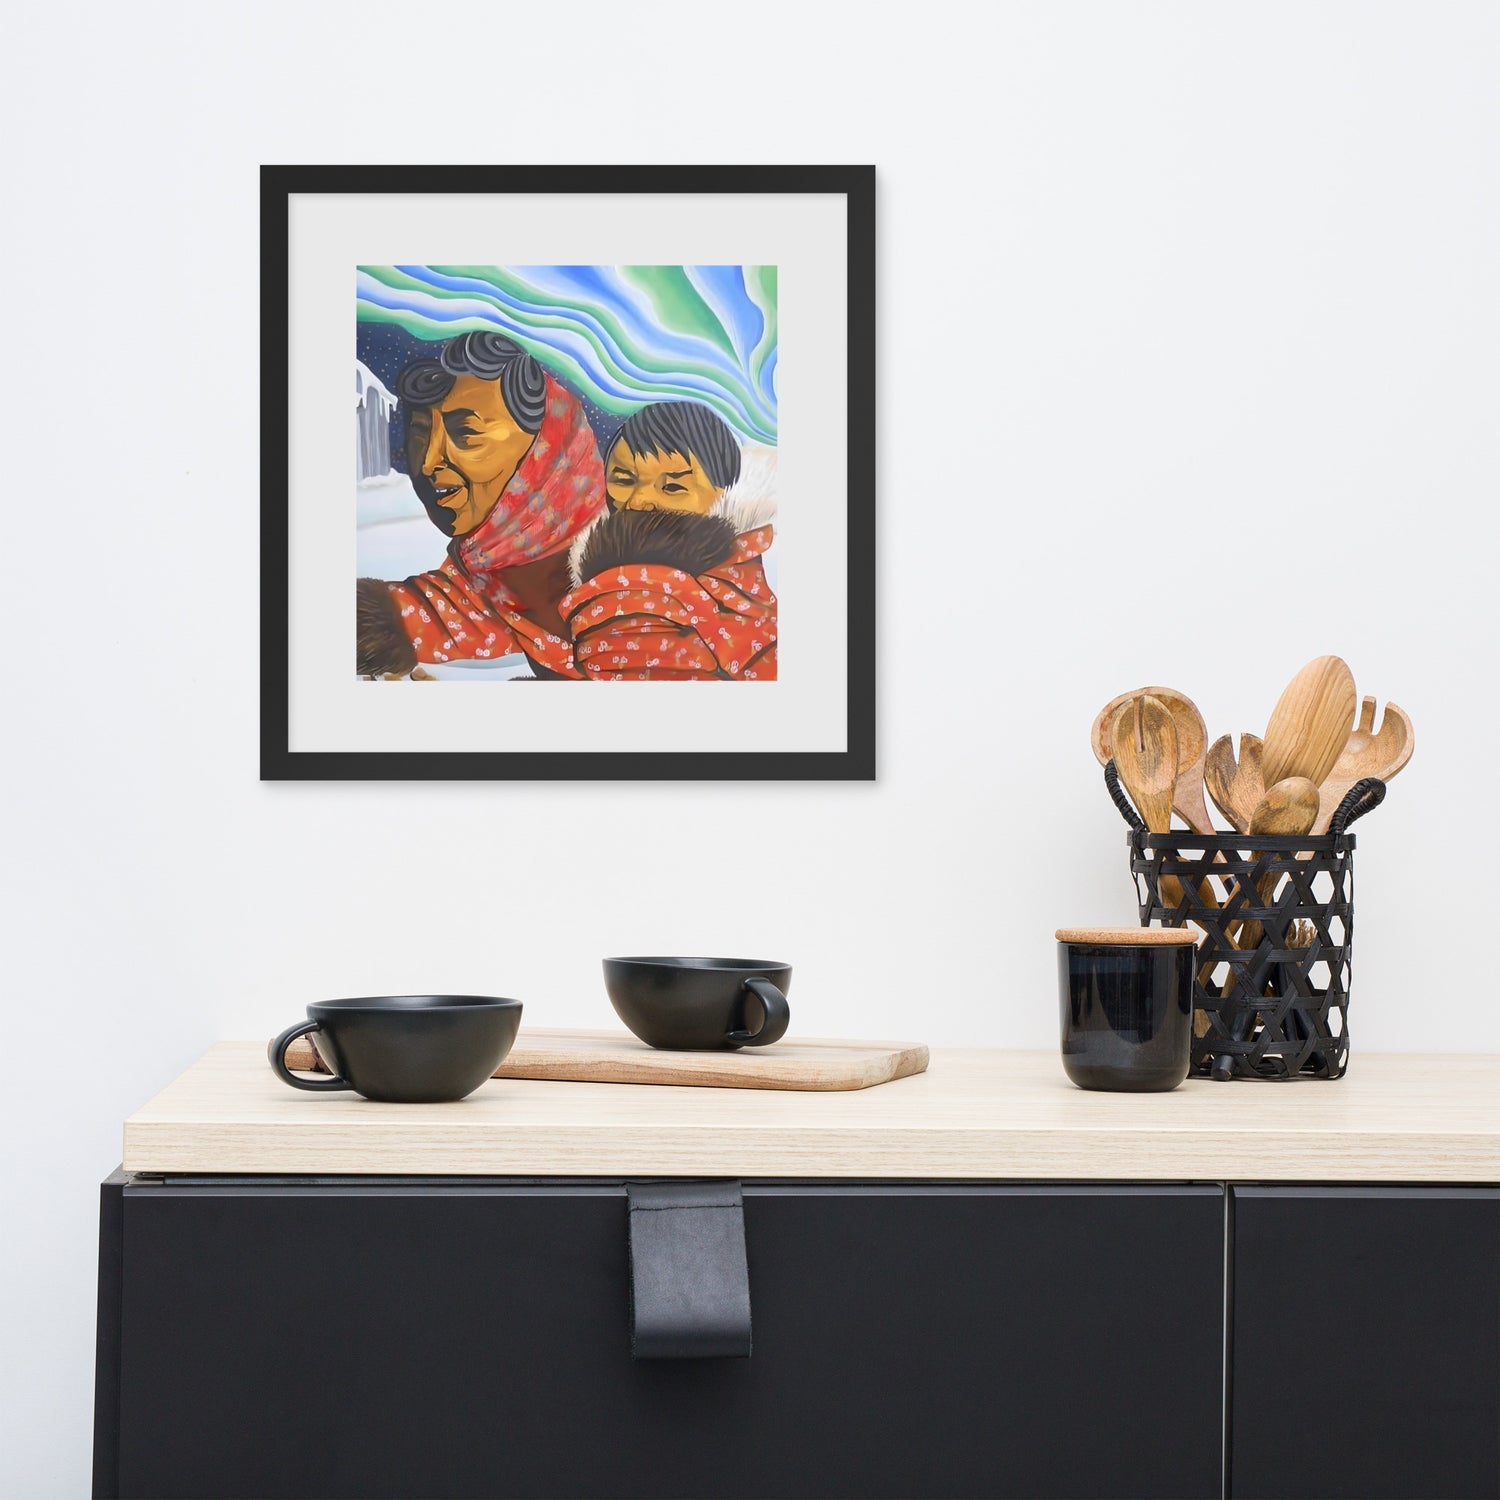 A kitchen counter with a wood top, black utensils and a picture of a native Alaskan with her son walking through the snow at night. The Northern Lights behind her in the sky.